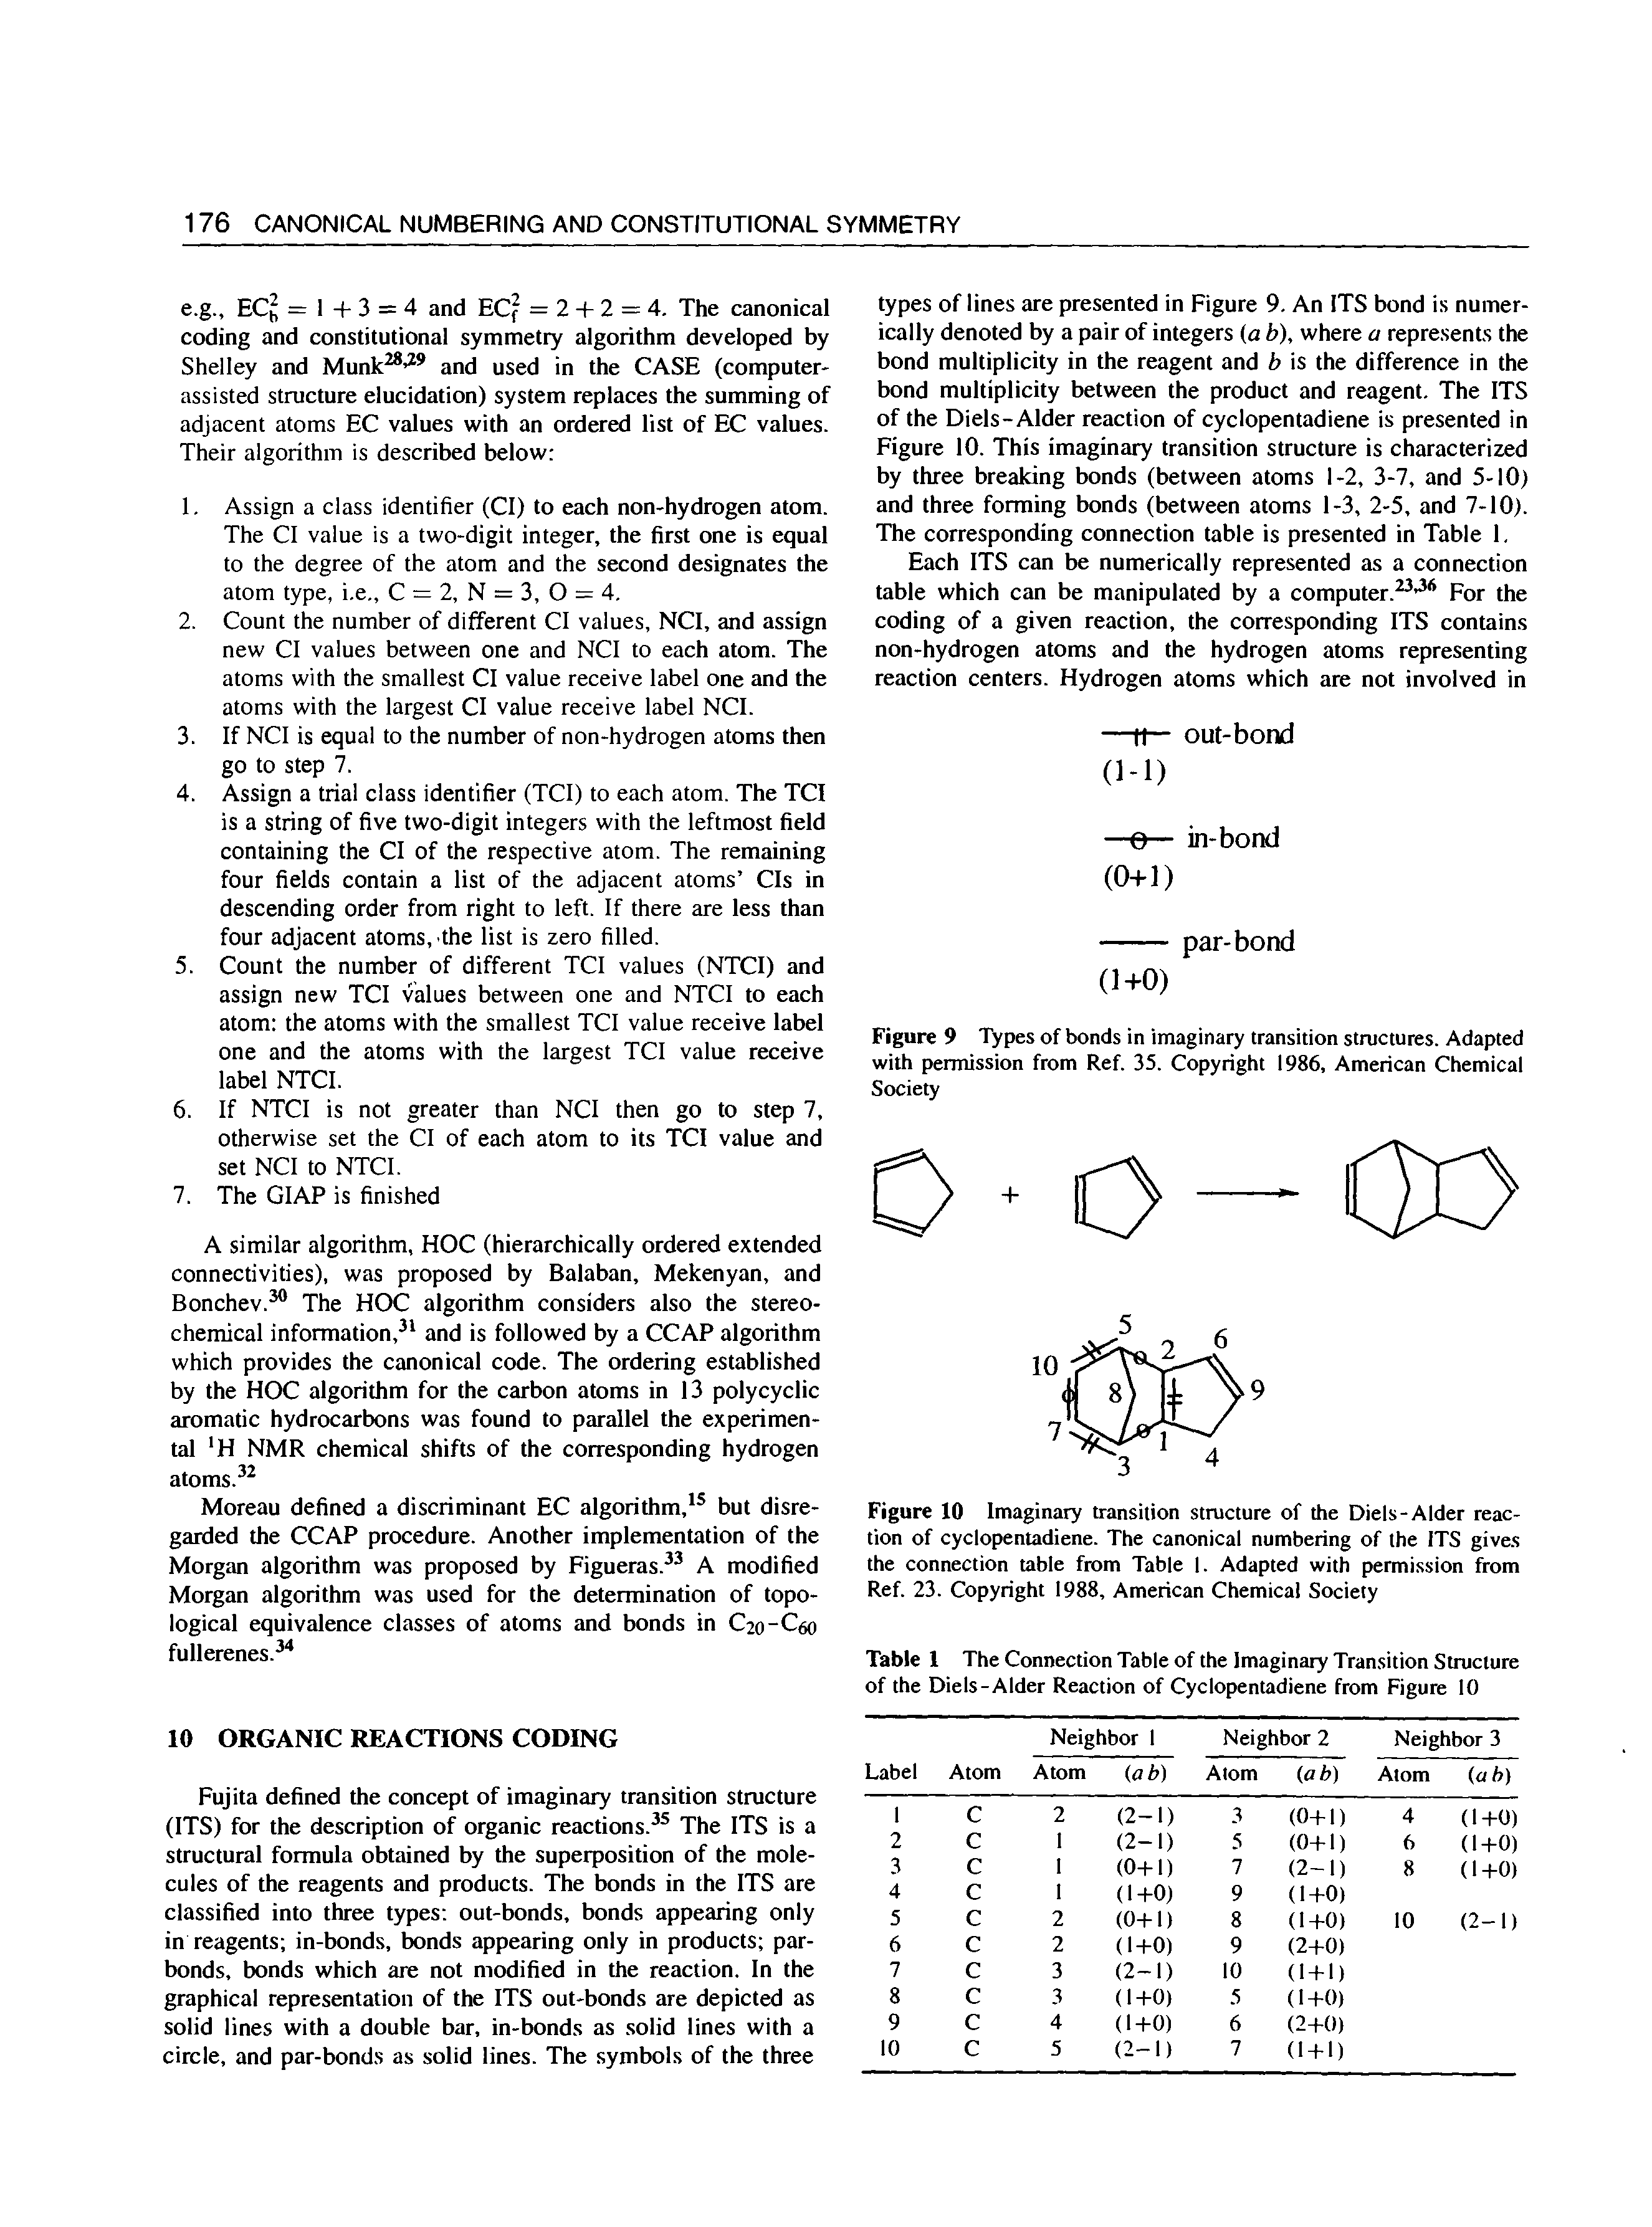 Figure 9 Types of bonds in imaginary transition structures. Adapted with permission from Ref. 35. Copyright 1986, American Chemical Society...